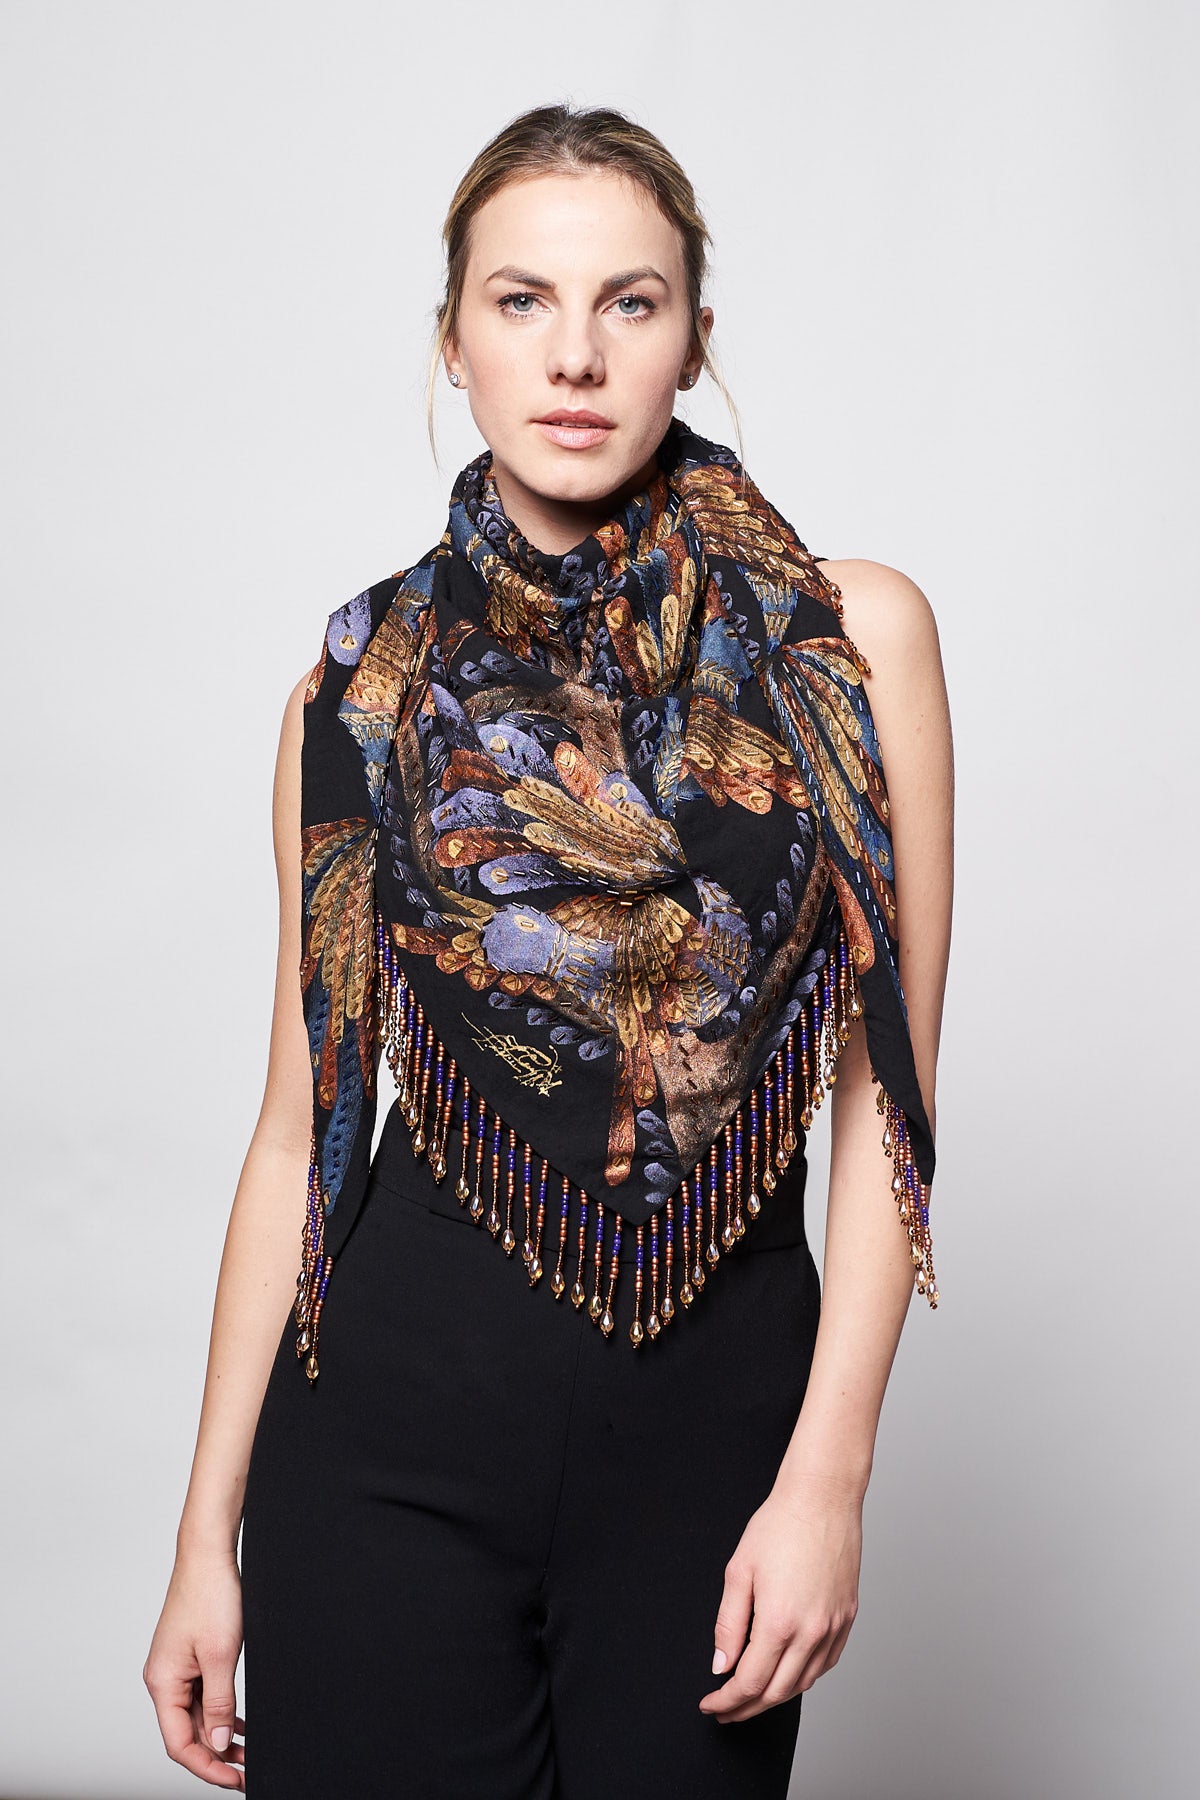 HAND-PAINTED AND HAND-EMBROIDERED TRIANGULAR SHAWL WITH BEADED FRINGE - PAPEL AMATE